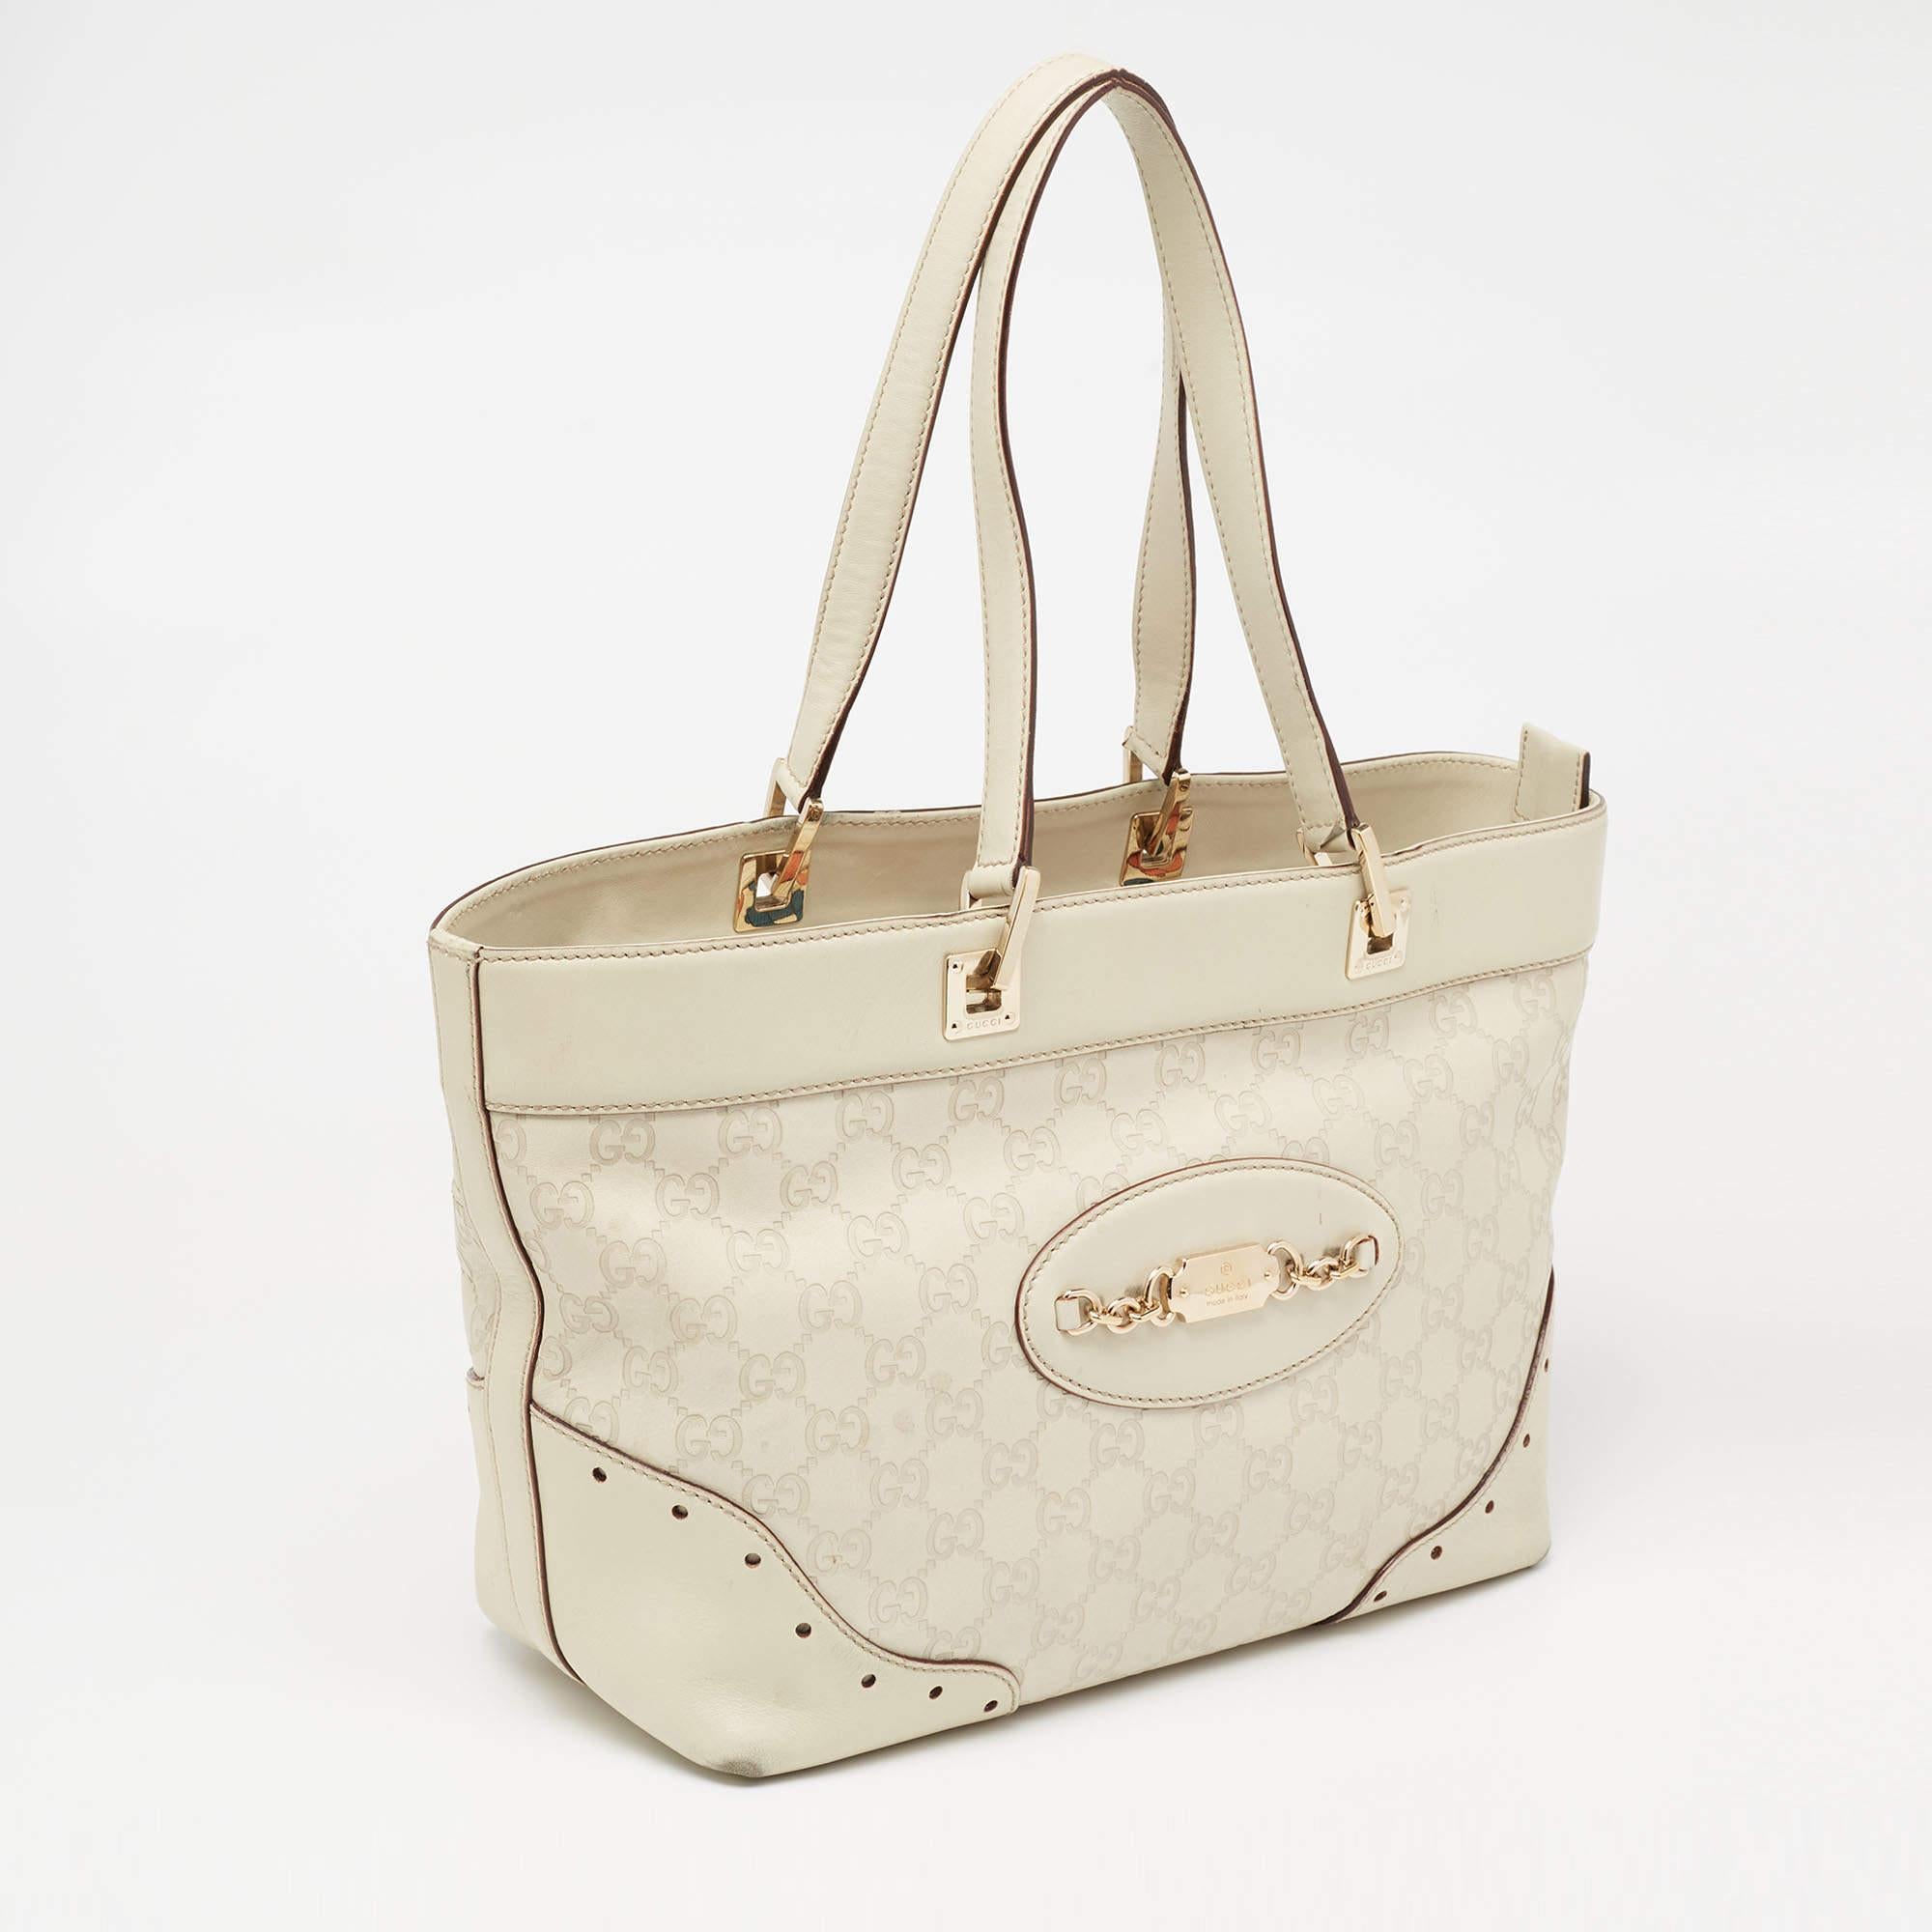 Give your fashion confusion a backseat by owning this stunning Gucci Punch tote. Functional and stylish, it flaunts gold-tone hardware, a spacious fabric-lined interior, and dual handles at the top. It comes made from the signature Guccissima